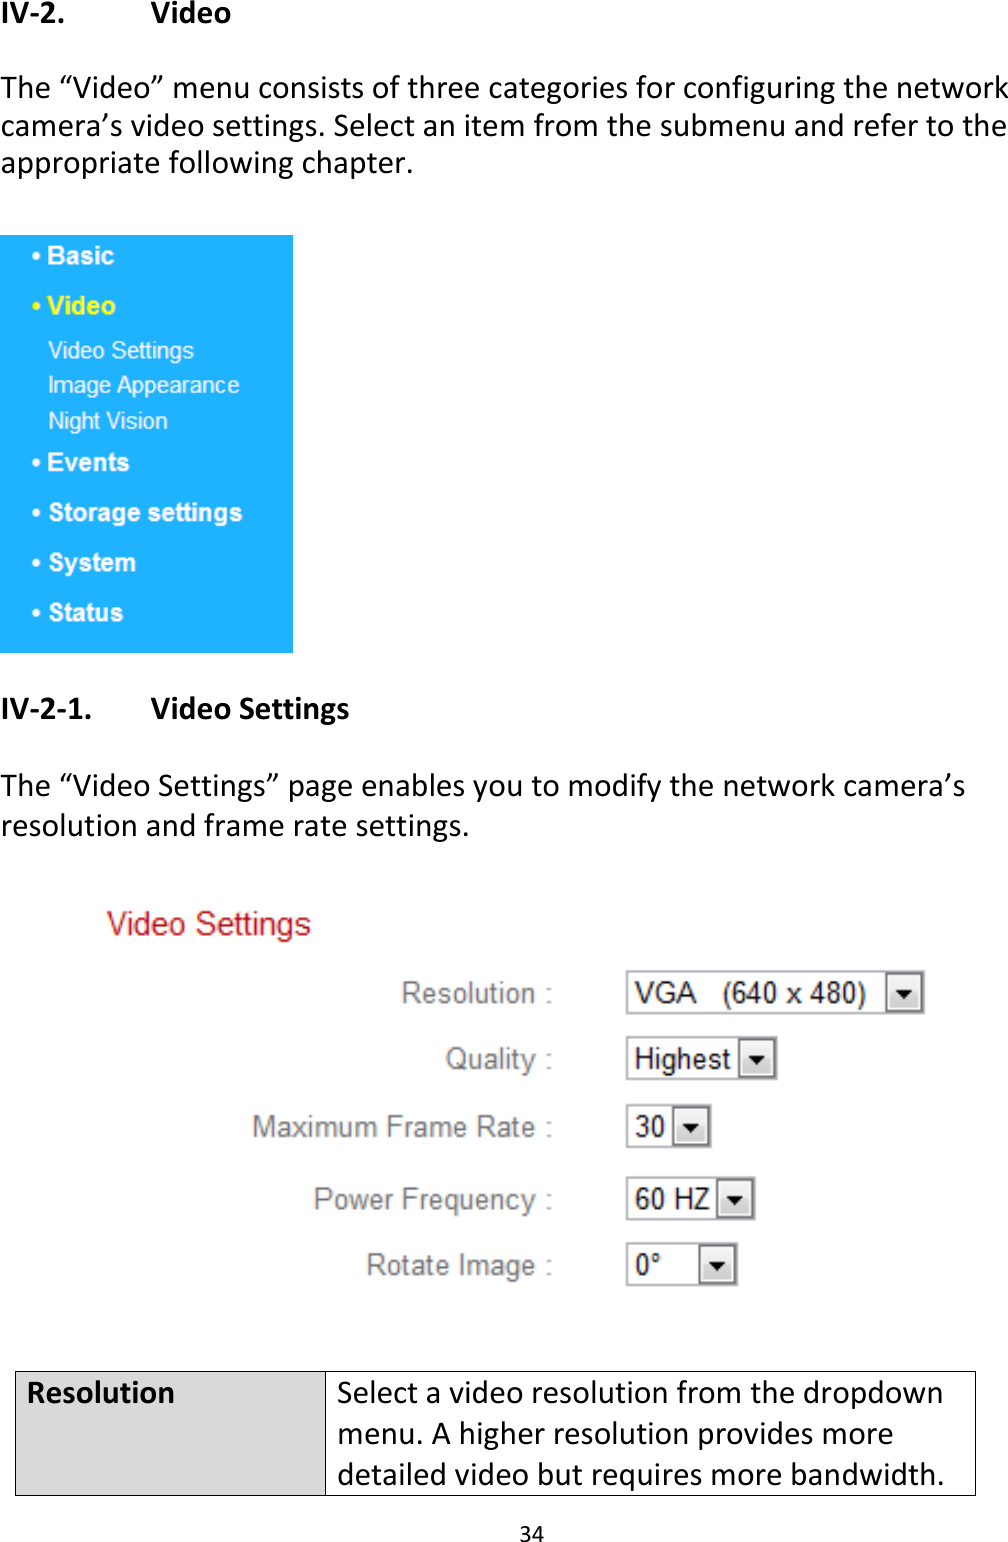 34  IV-2.    Video  The “Video” menu consists of three categories for configuring the network camera’s video settings. Select an item from the submenu and refer to the appropriate following chapter.   IV-2-1.   Video Settings  The “Video Settings” page enables you to modify the network camera’s resolution and frame rate settings.    Resolution Select a video resolution from the dropdown menu. A higher resolution provides more detailed video but requires more bandwidth. 